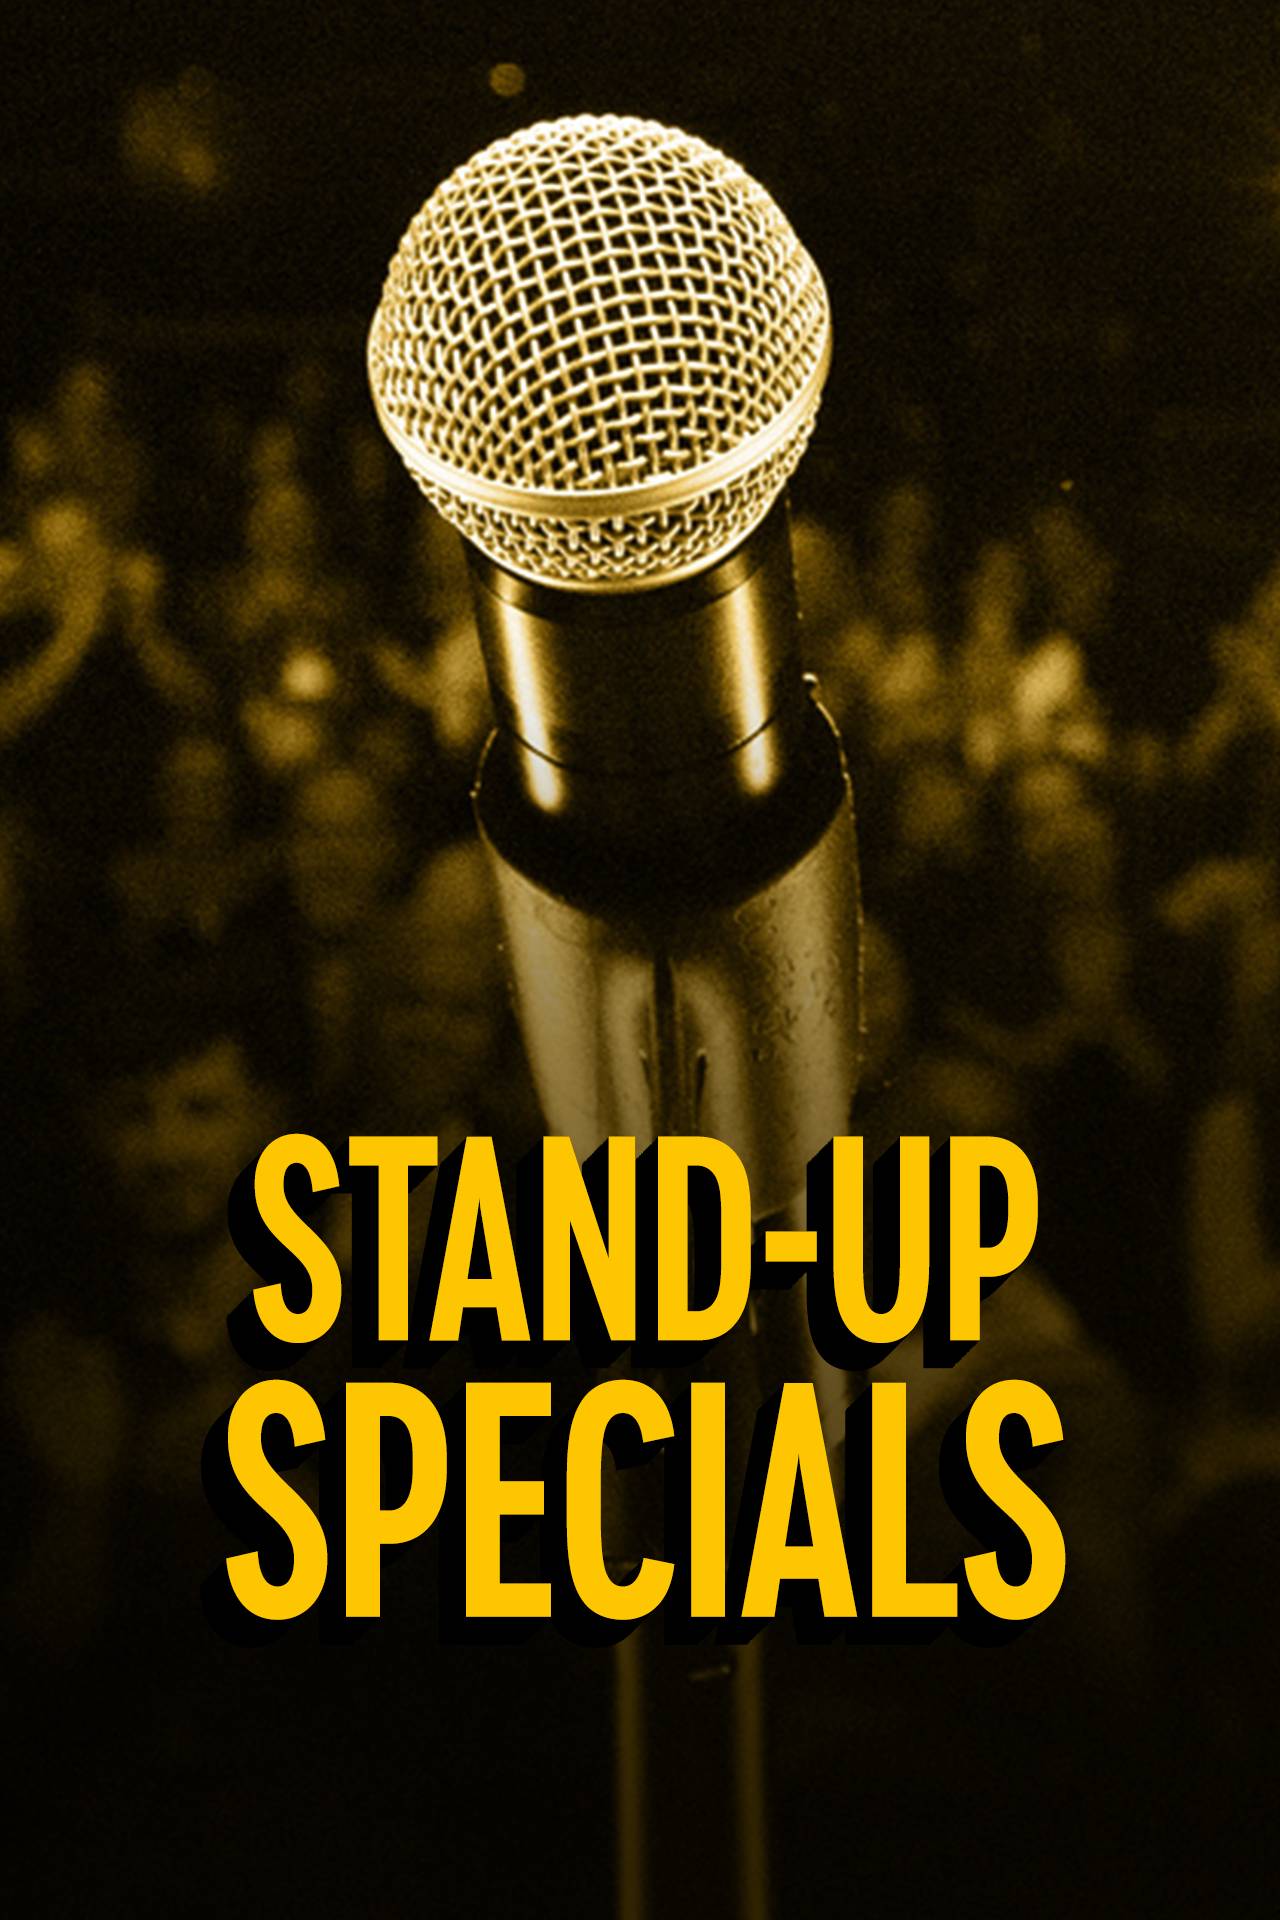 Stand-Up Comedians | Funniest Stand-Up Comedy Videos | Comedy Central US